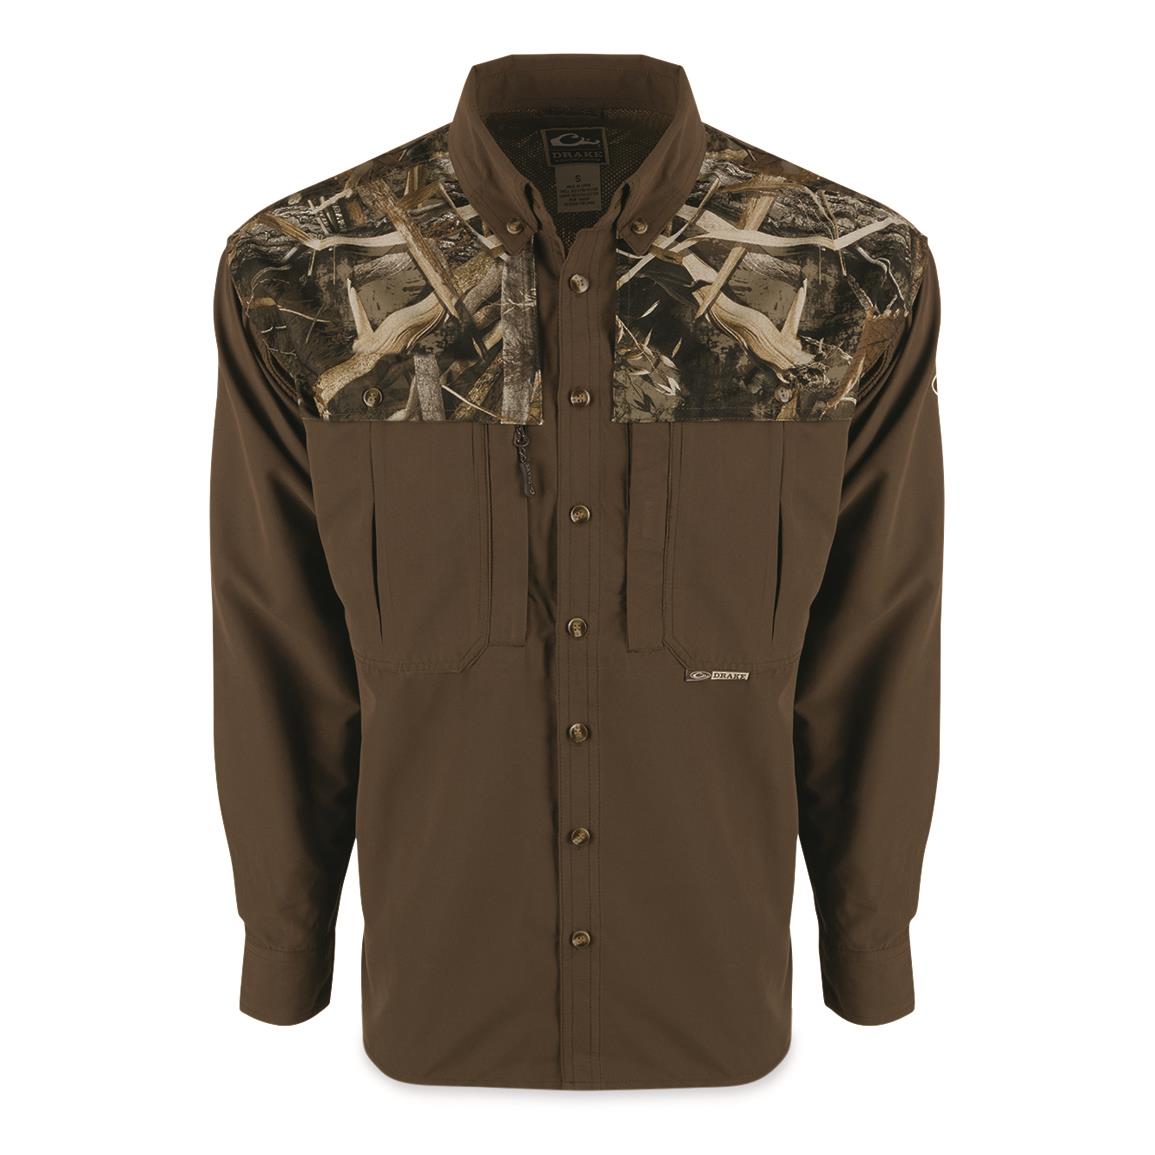 Drake Waterfowl Youth Two-tone Camo Wingshooter's Long-sleeve Shirt, Realtree MAX-5®